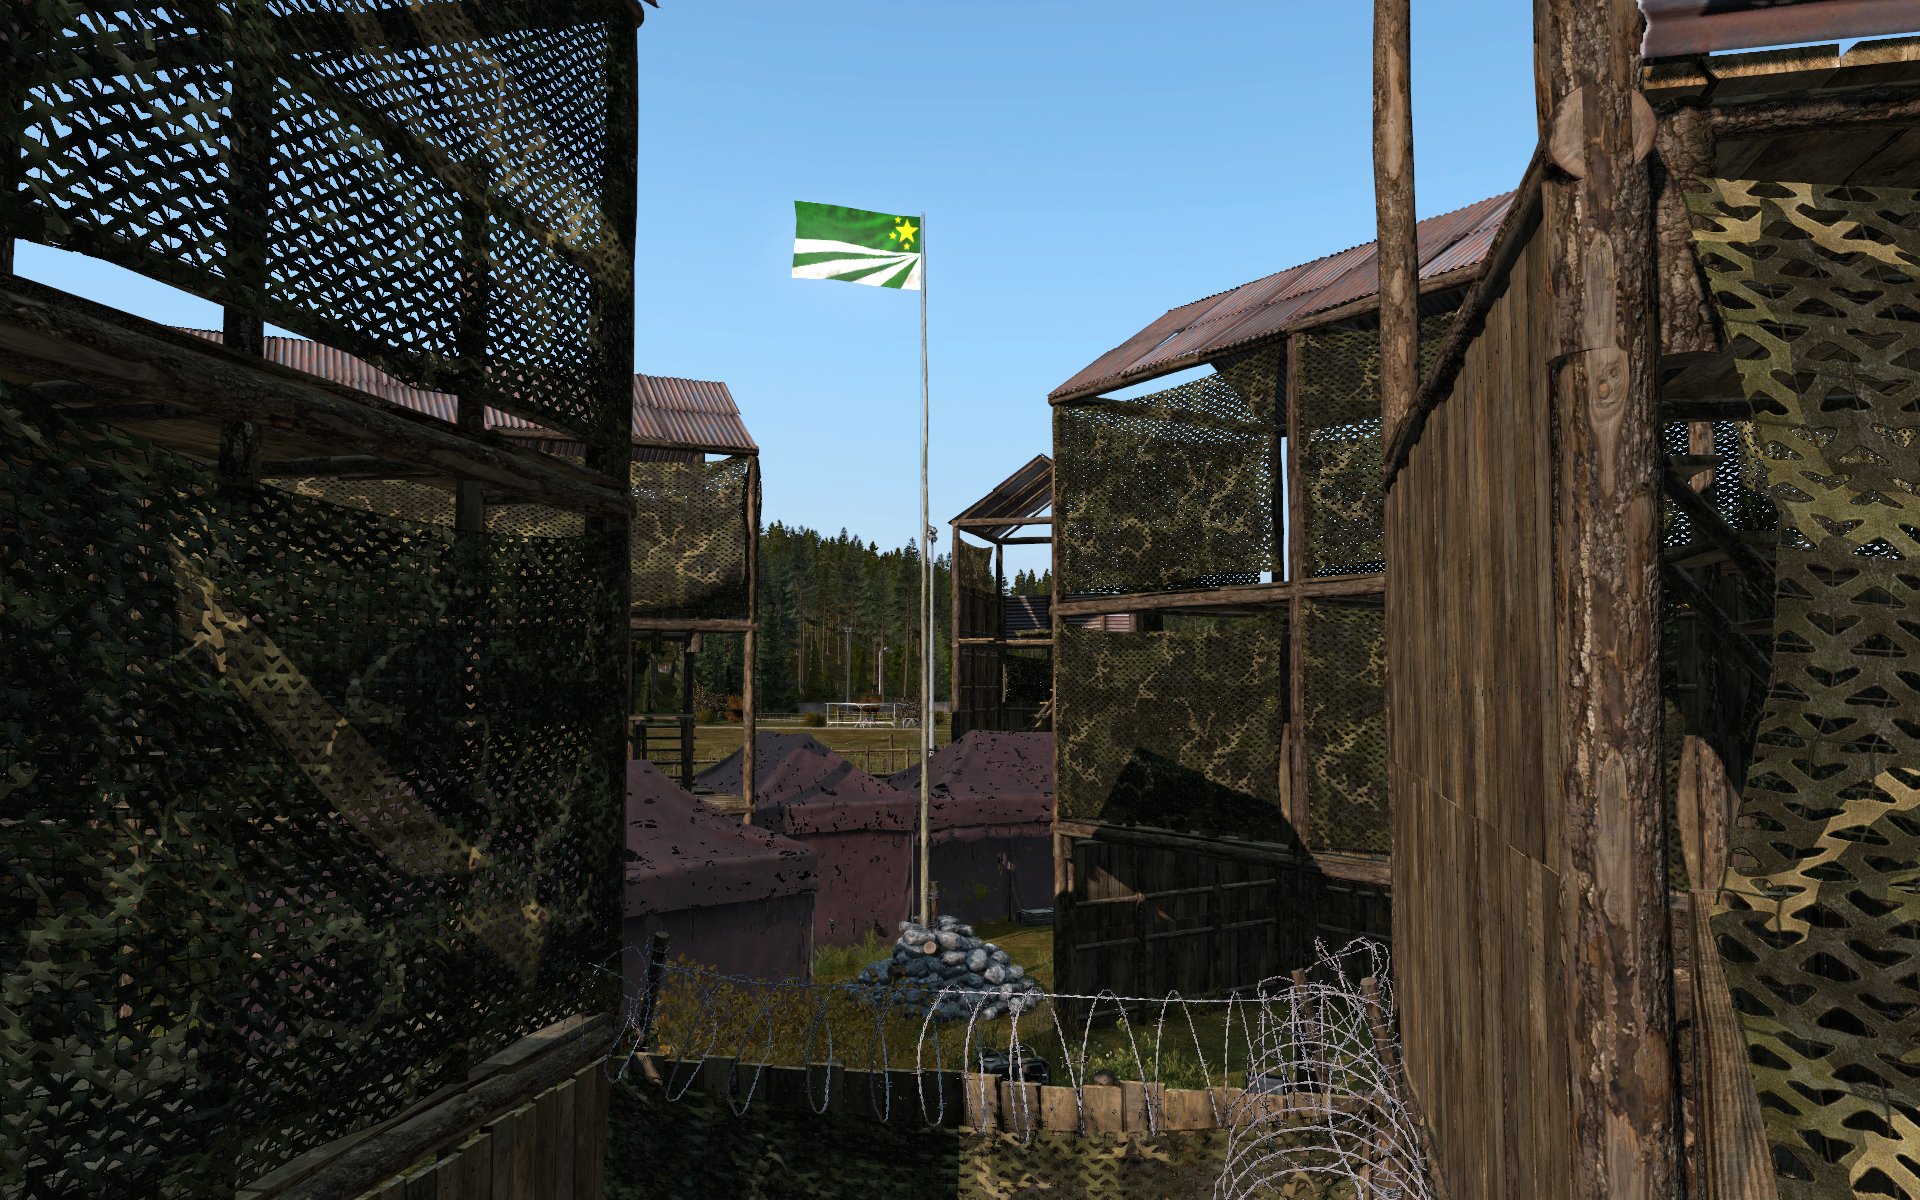 Dayz patch 1.09 flag pole for base building